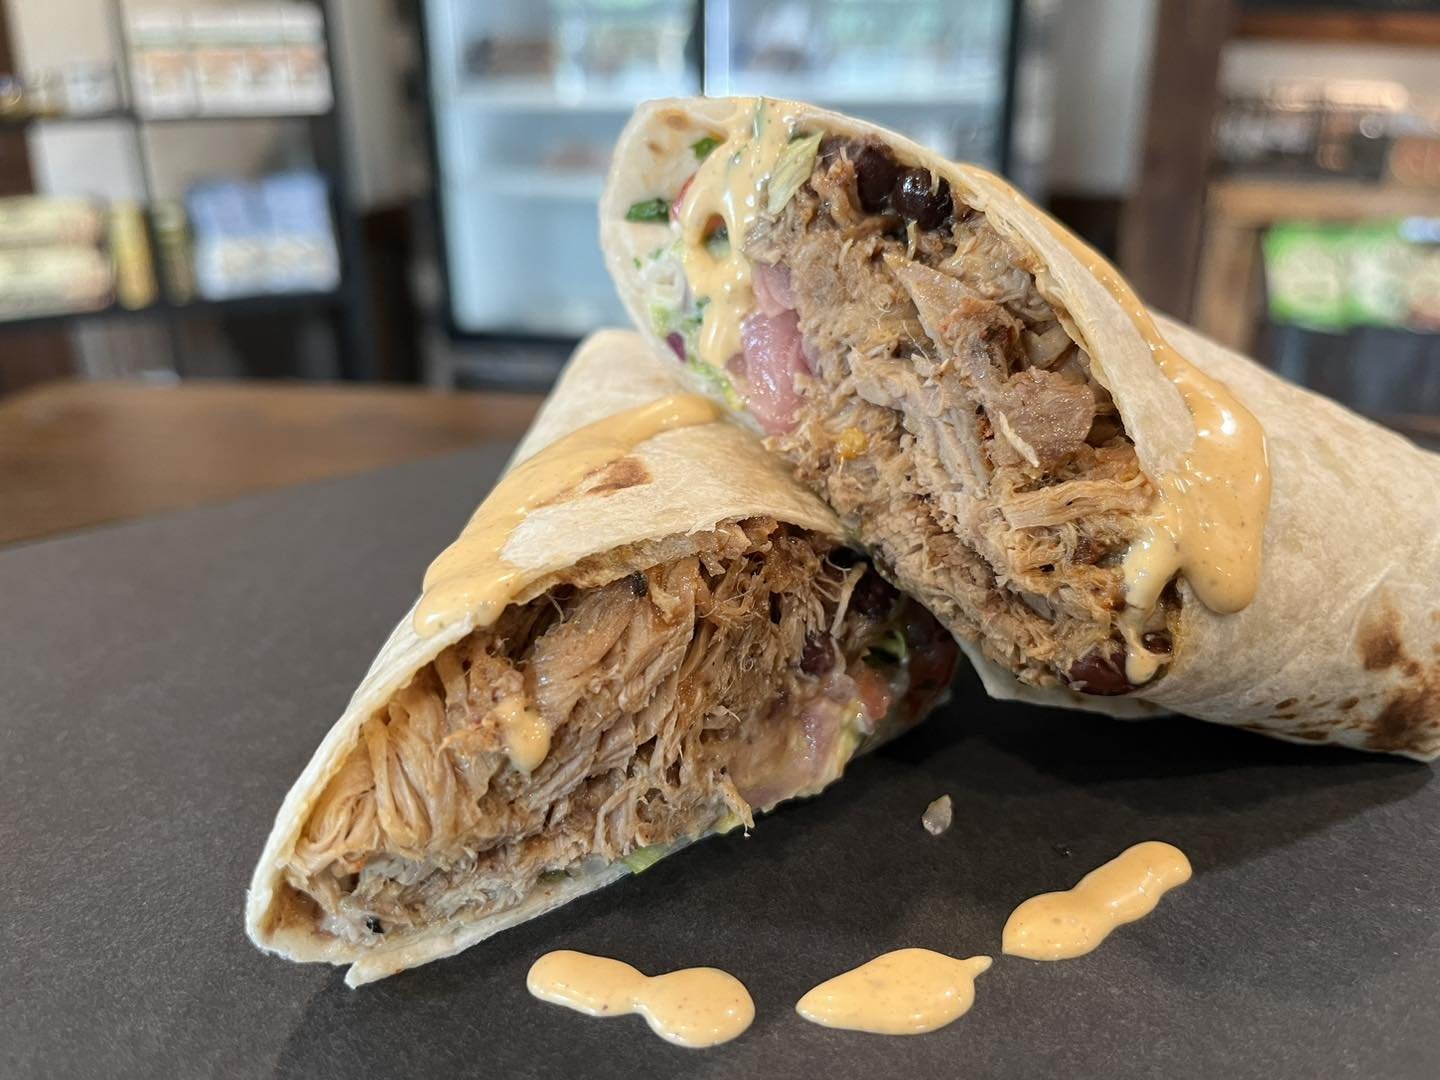 Porritto
Pulled pork, black beans, refried beans, rice, pico, quac,lettuce, cheese, pickled onions and sour cream!  What??? #lunch #grill #eatlocal